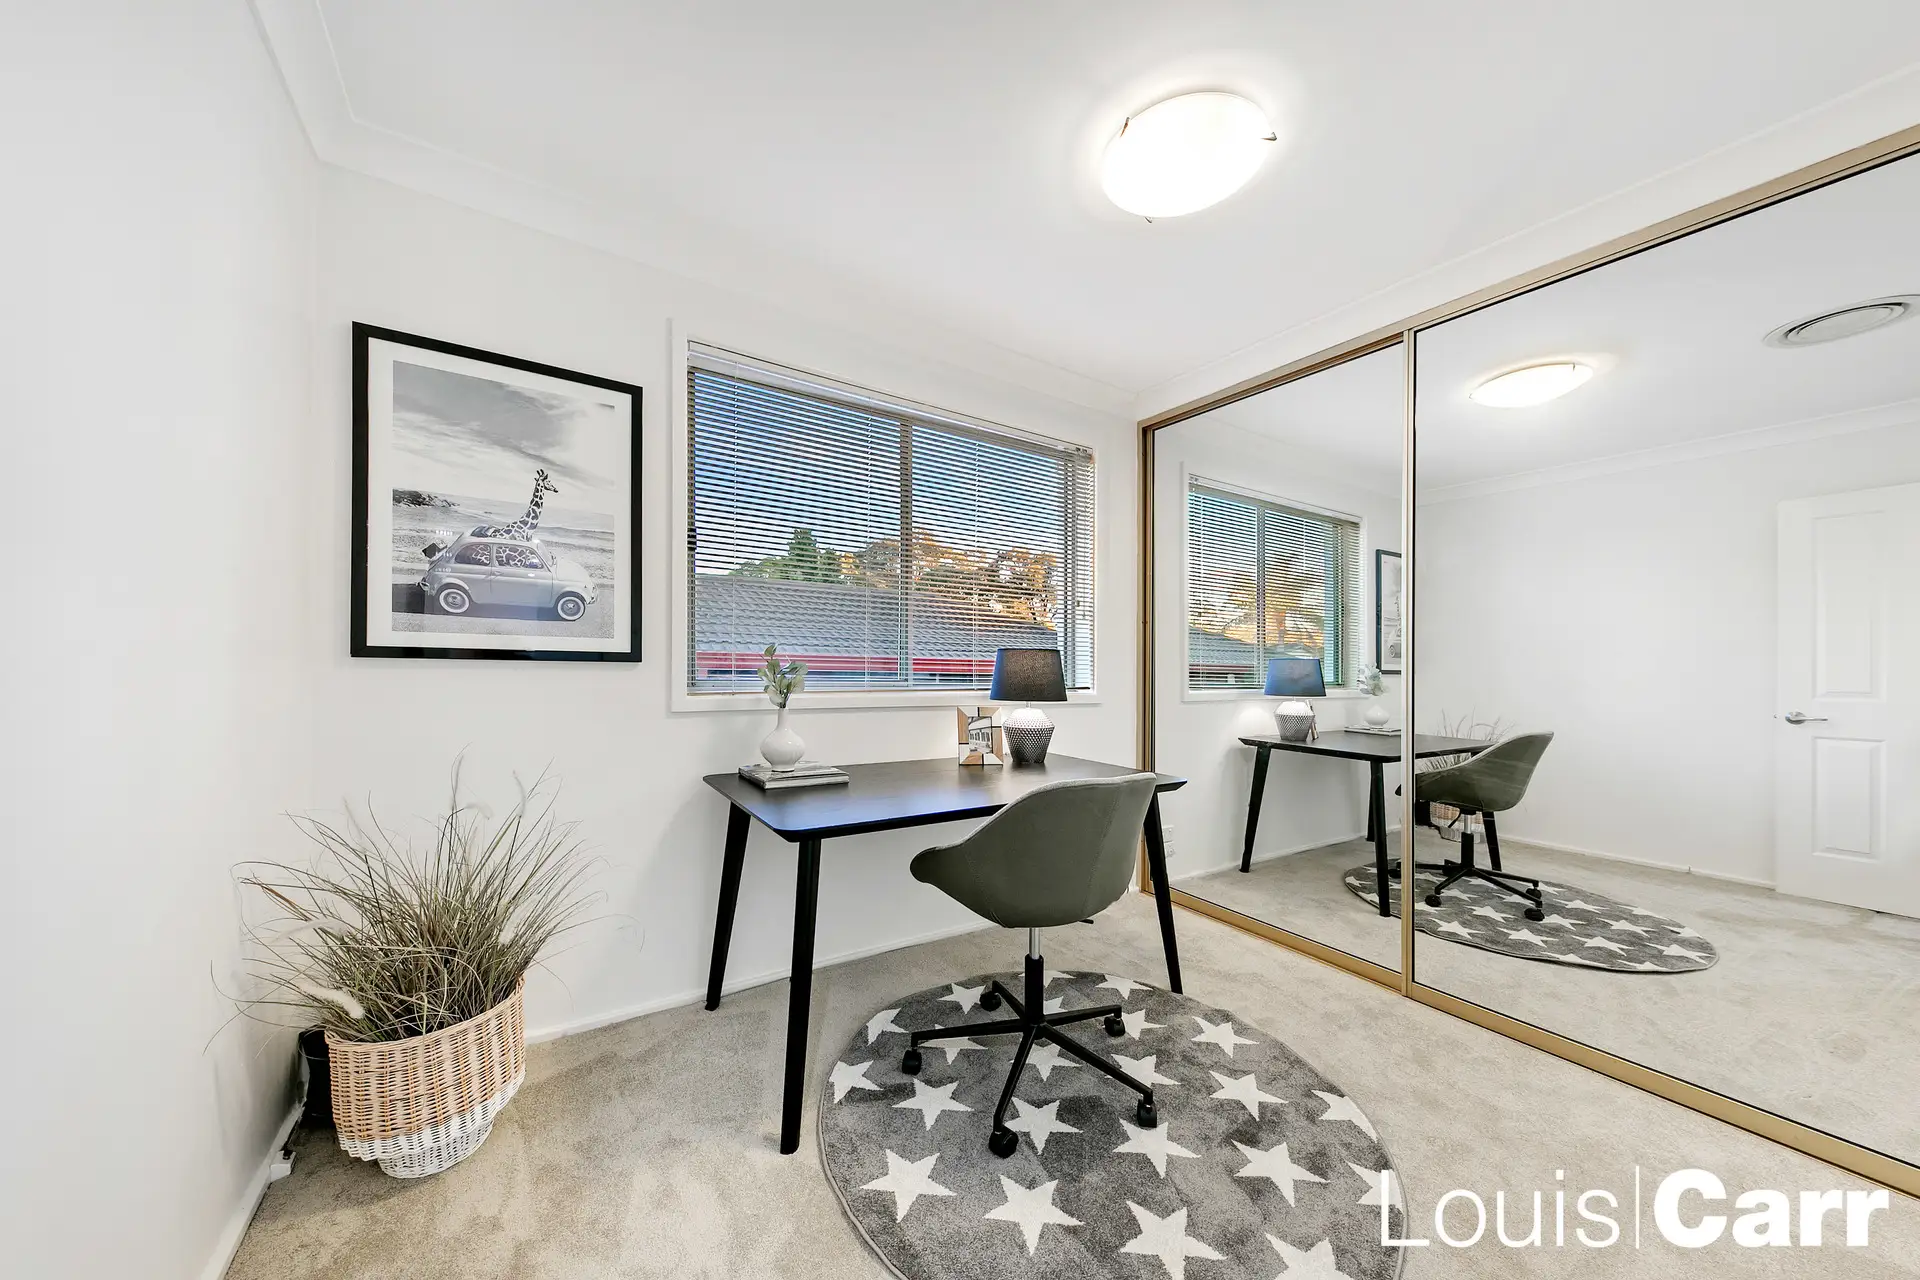 Photo #11: 94 Tamboura Avenue, Baulkham Hills - Sold by Louis Carr Real Estate